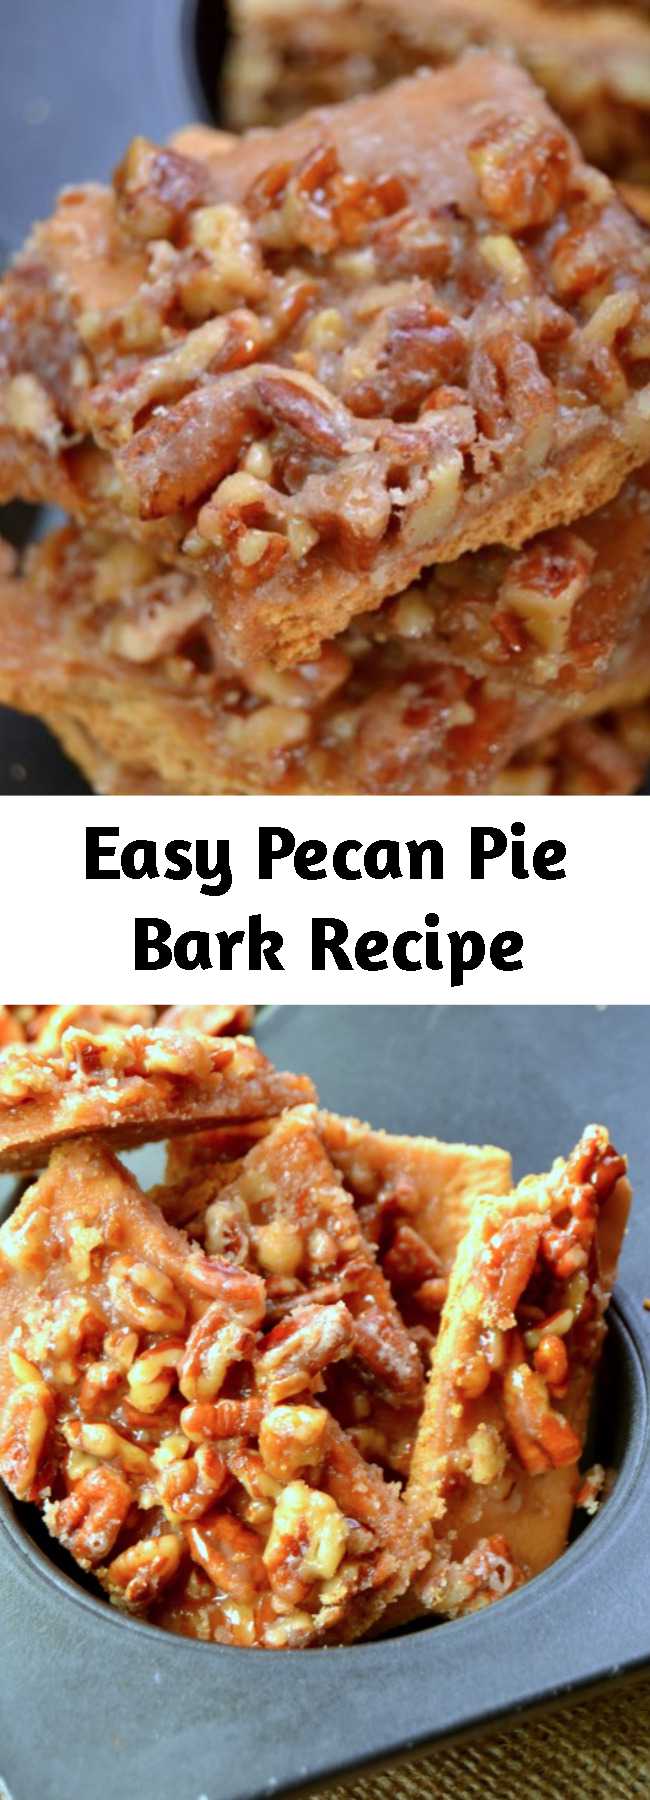 Easy Pecan Pie Bark Recipe - This Pecan Pie Bark is so incredibly good and it just can’t get any easier to make. This is the perfect creative dessert recipe for the holidays. Make several batches because it disappears so fast!